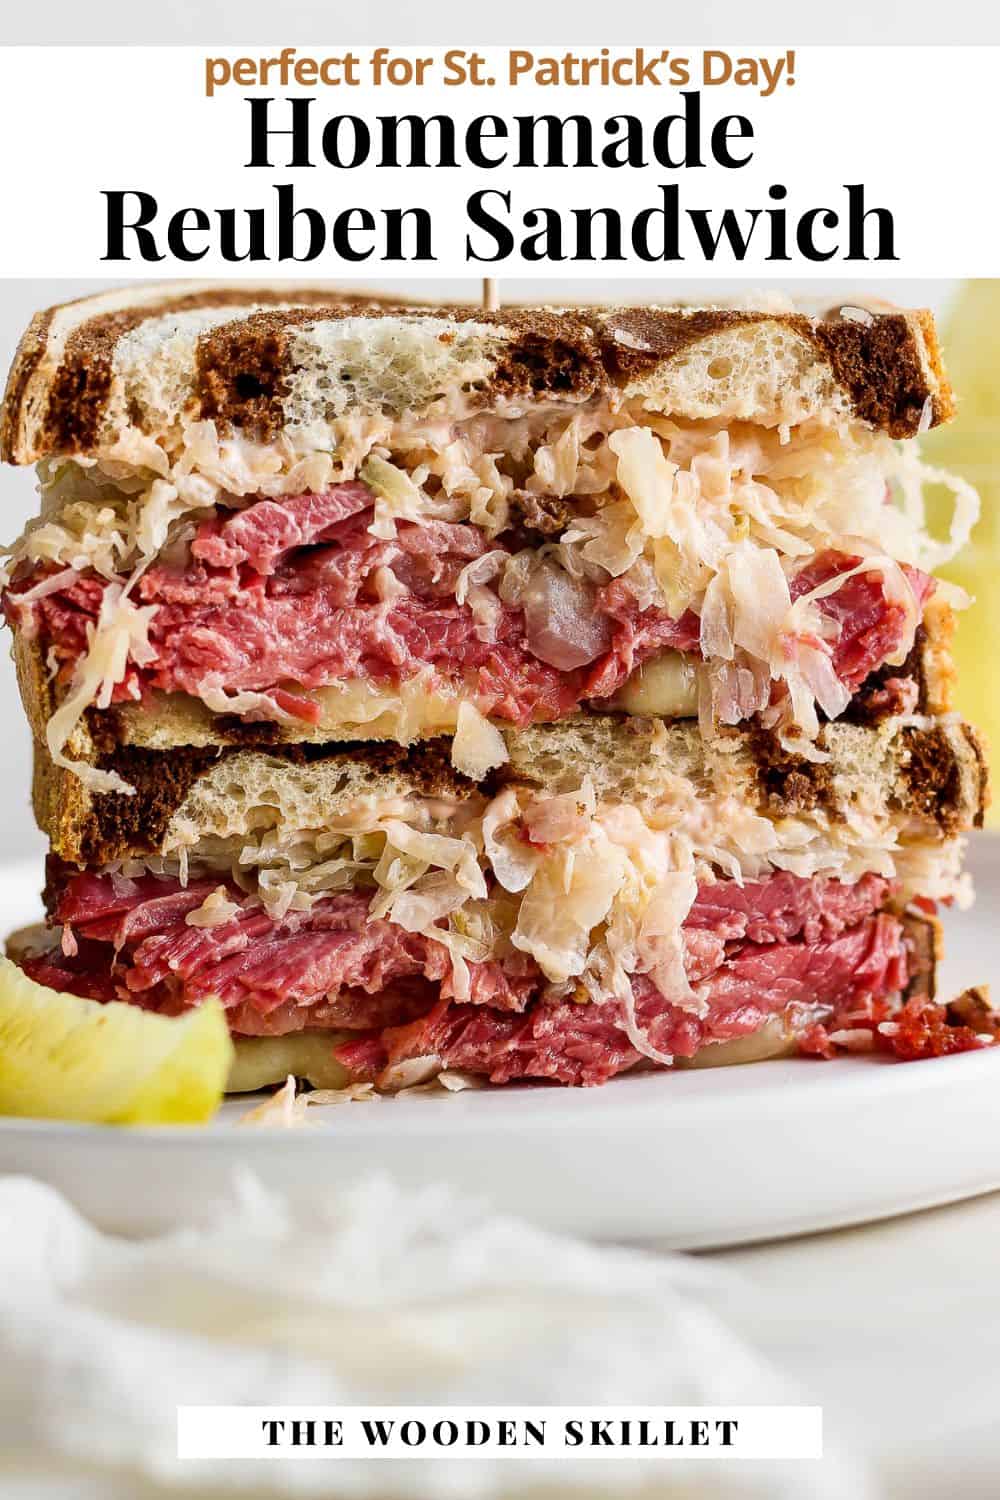 Pinterest image showing a reuben sandwich with the title "homemade sandwich, perfect for St. Patrick's Day!